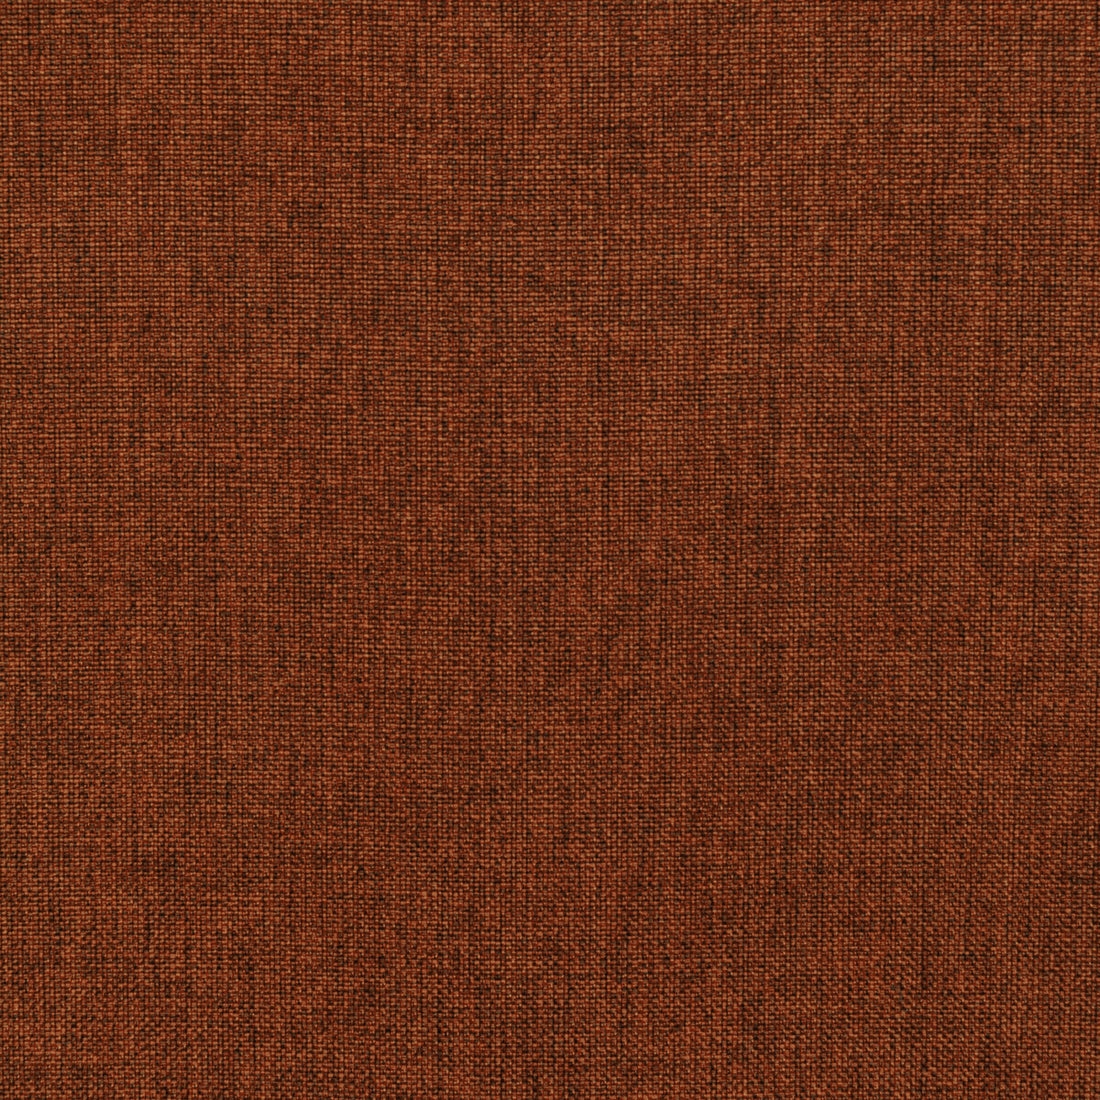 Fortify fabric in harvest color - pattern 36257.12.0 - by Kravet Contract in the Supreen collection